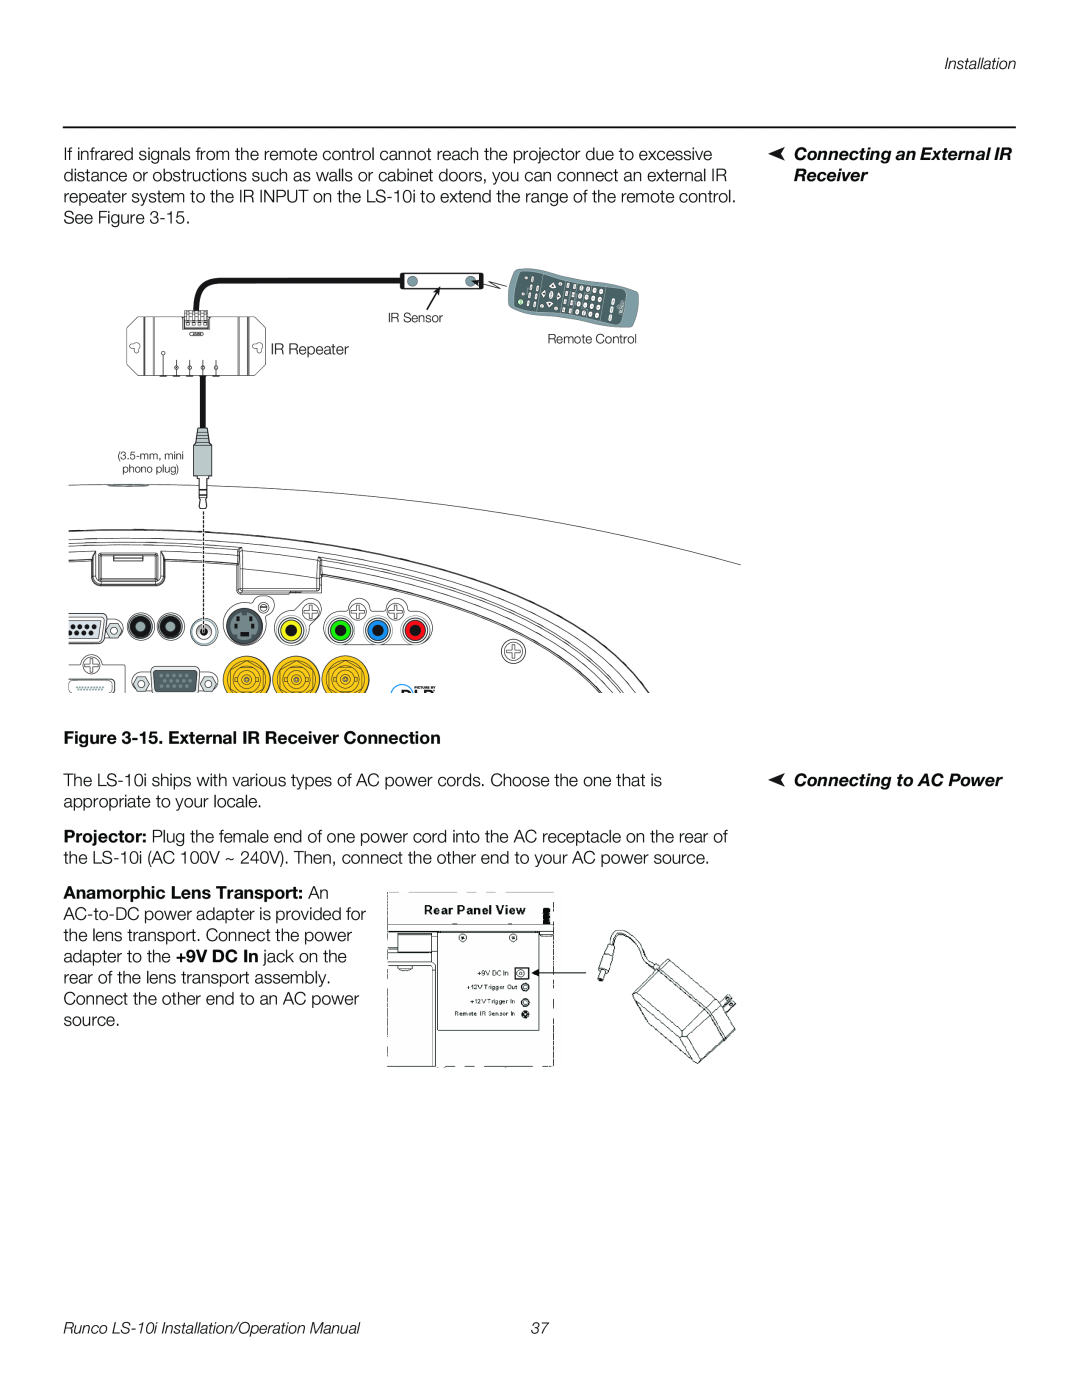 Runco LS-10I operation manual Connecting an External IR, 15.External IR Receiver Connection, Connecting to AC Power 